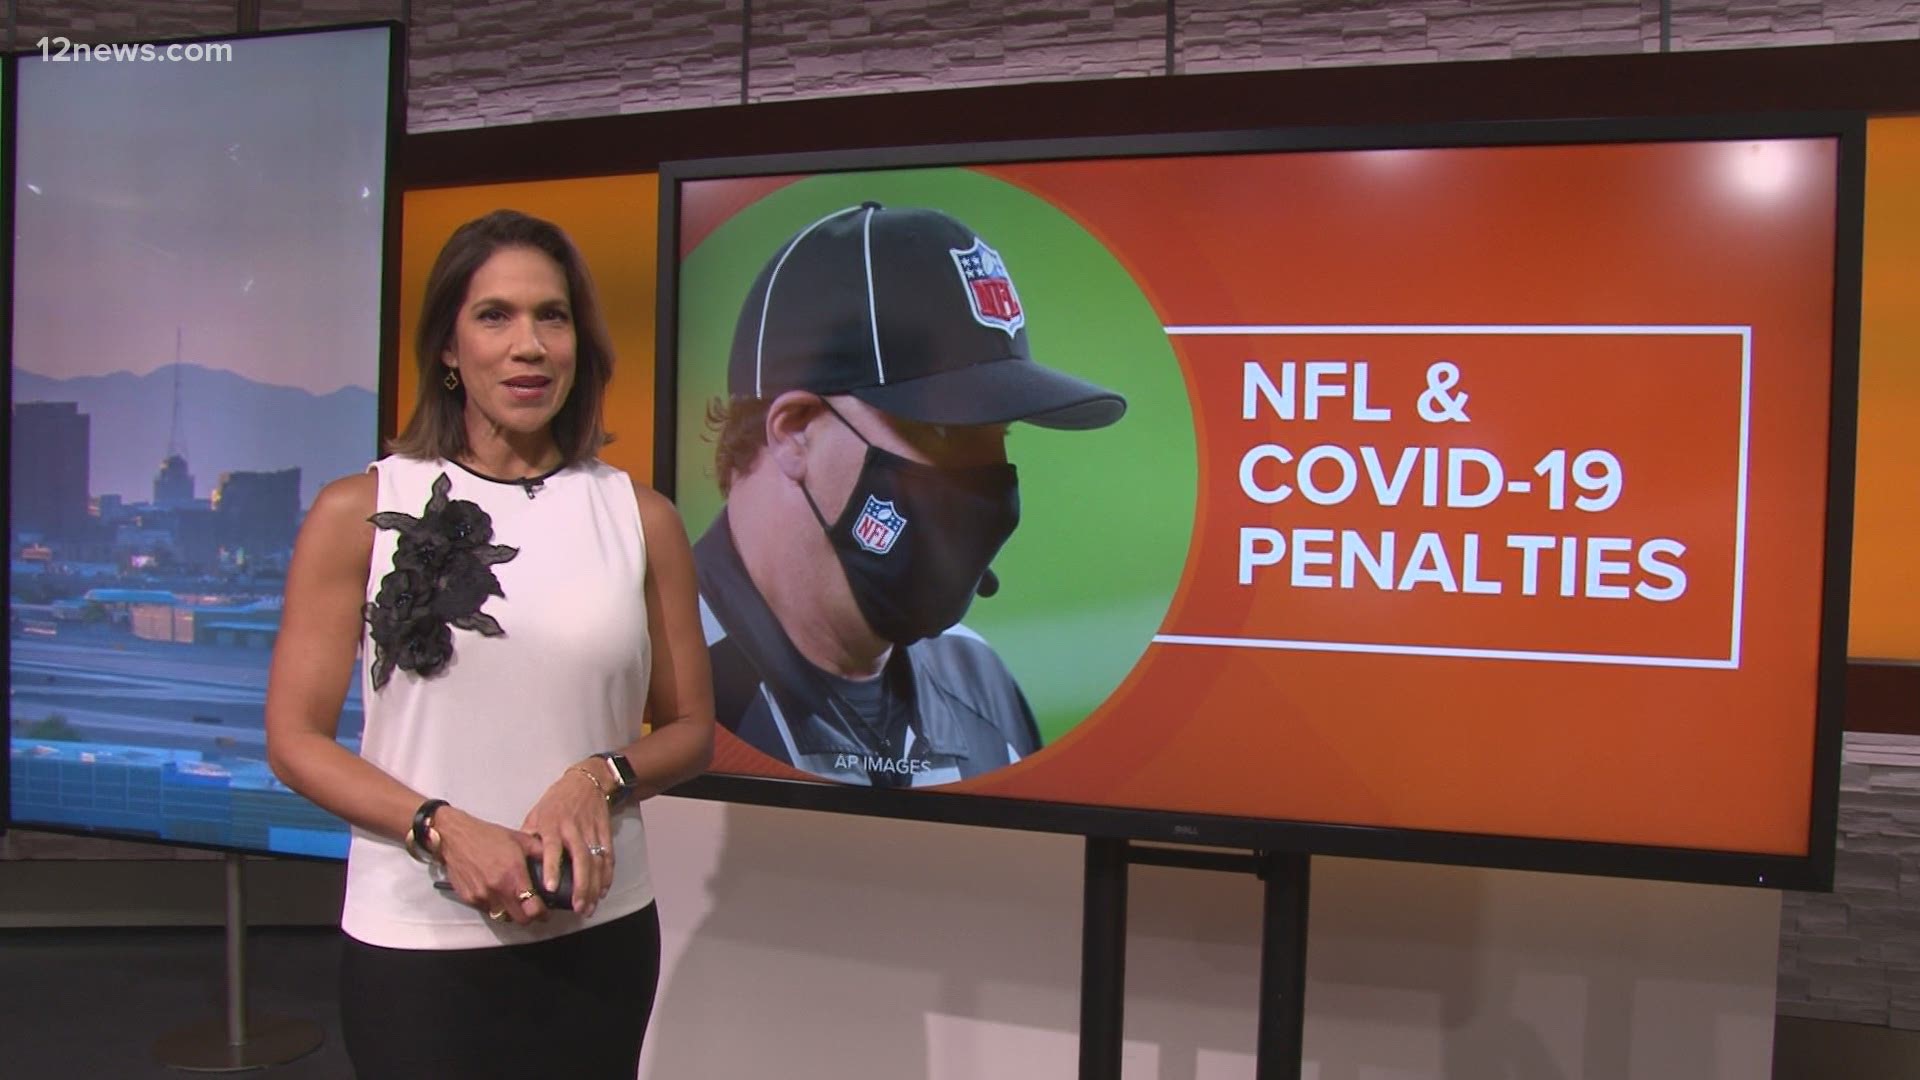 Should NFL teams have to forfeit if they violate COVID-19 protocol? We asked and Team 12's Rachel McNeill is reading your answers.